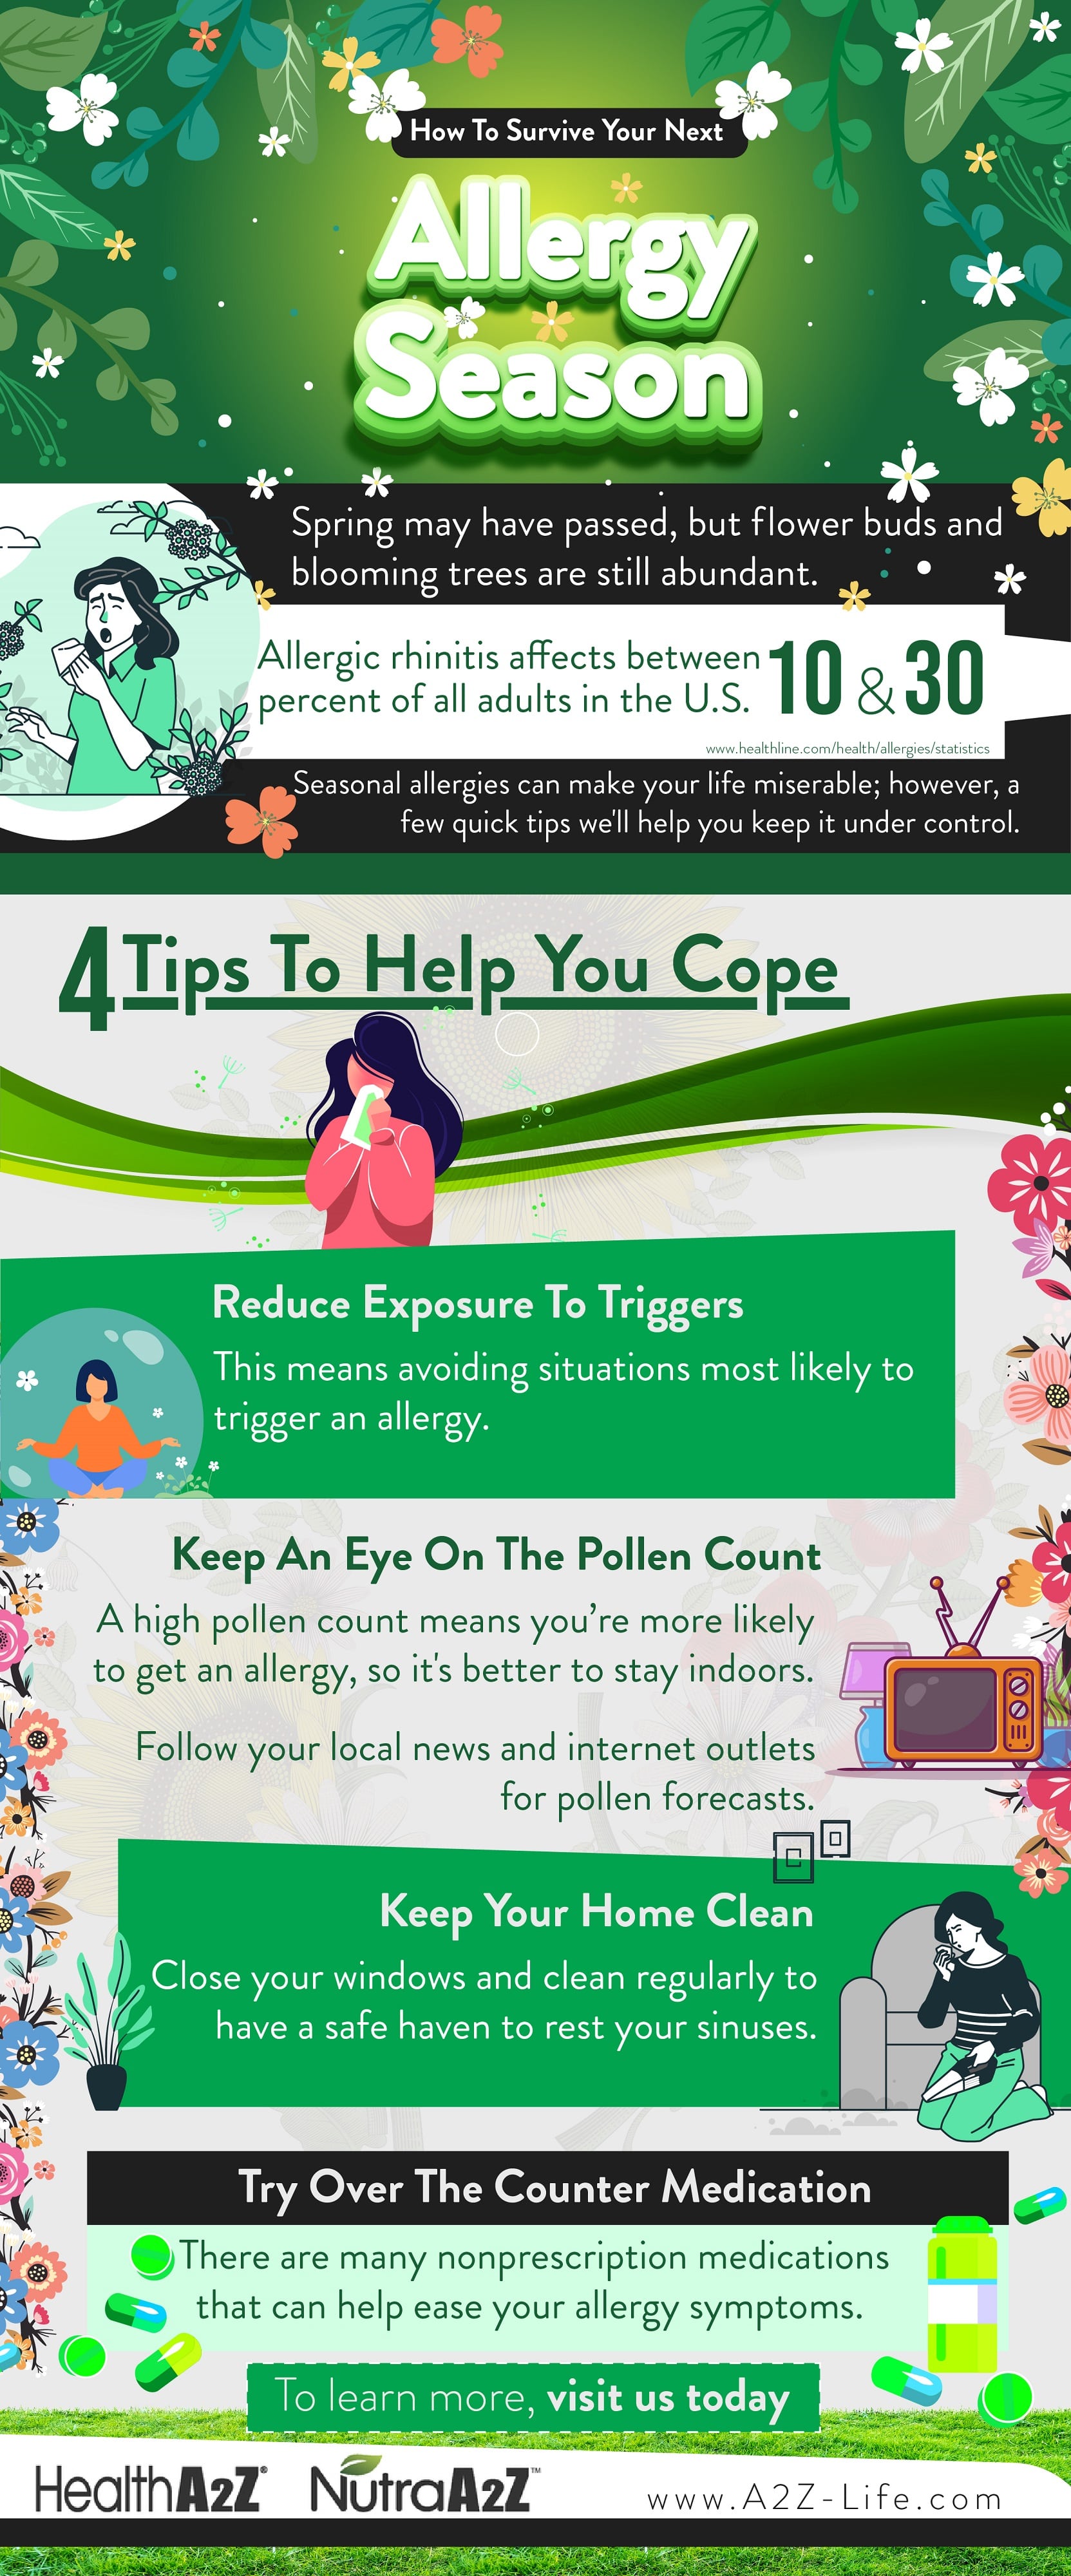 How to survive your next allergy season